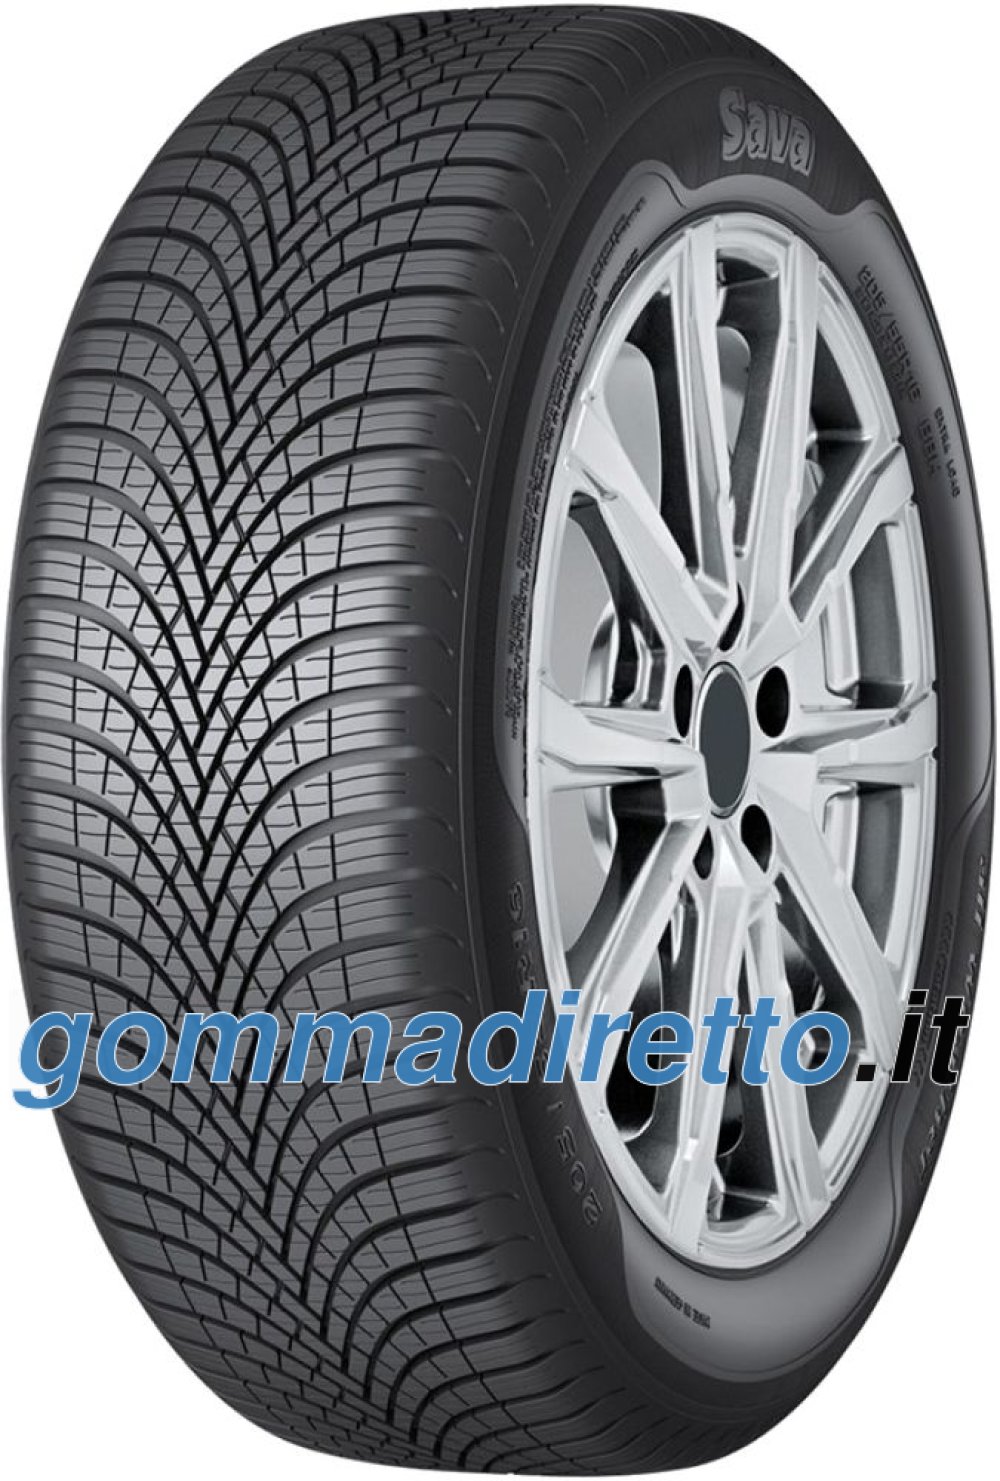 Image of        Sava All Weather ( 225/40 R18 92V XL )